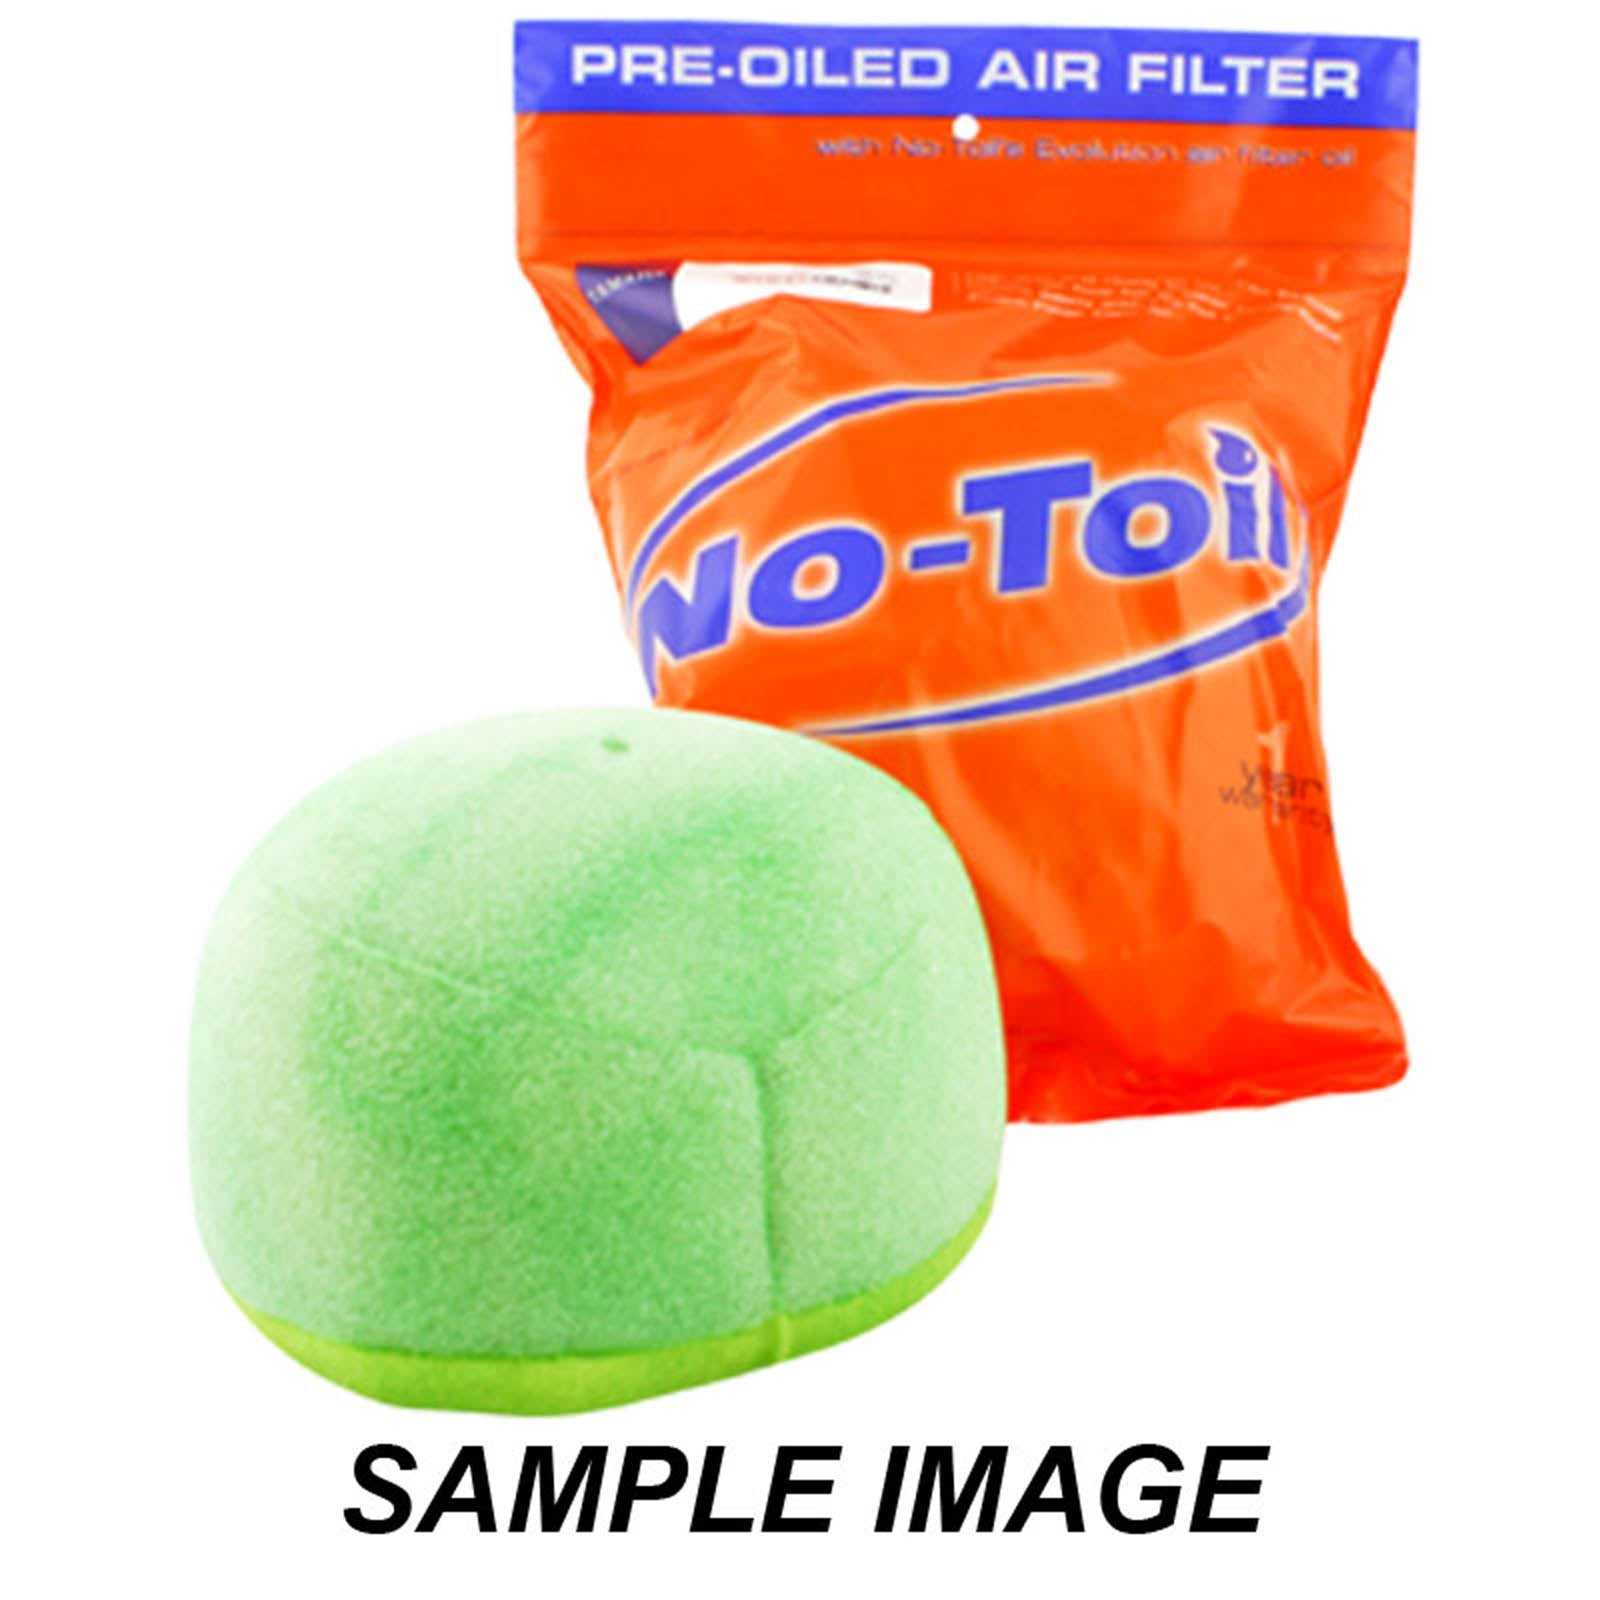 No-Toil, PRE-OILED FILTER YAM WR250R/X 08-20